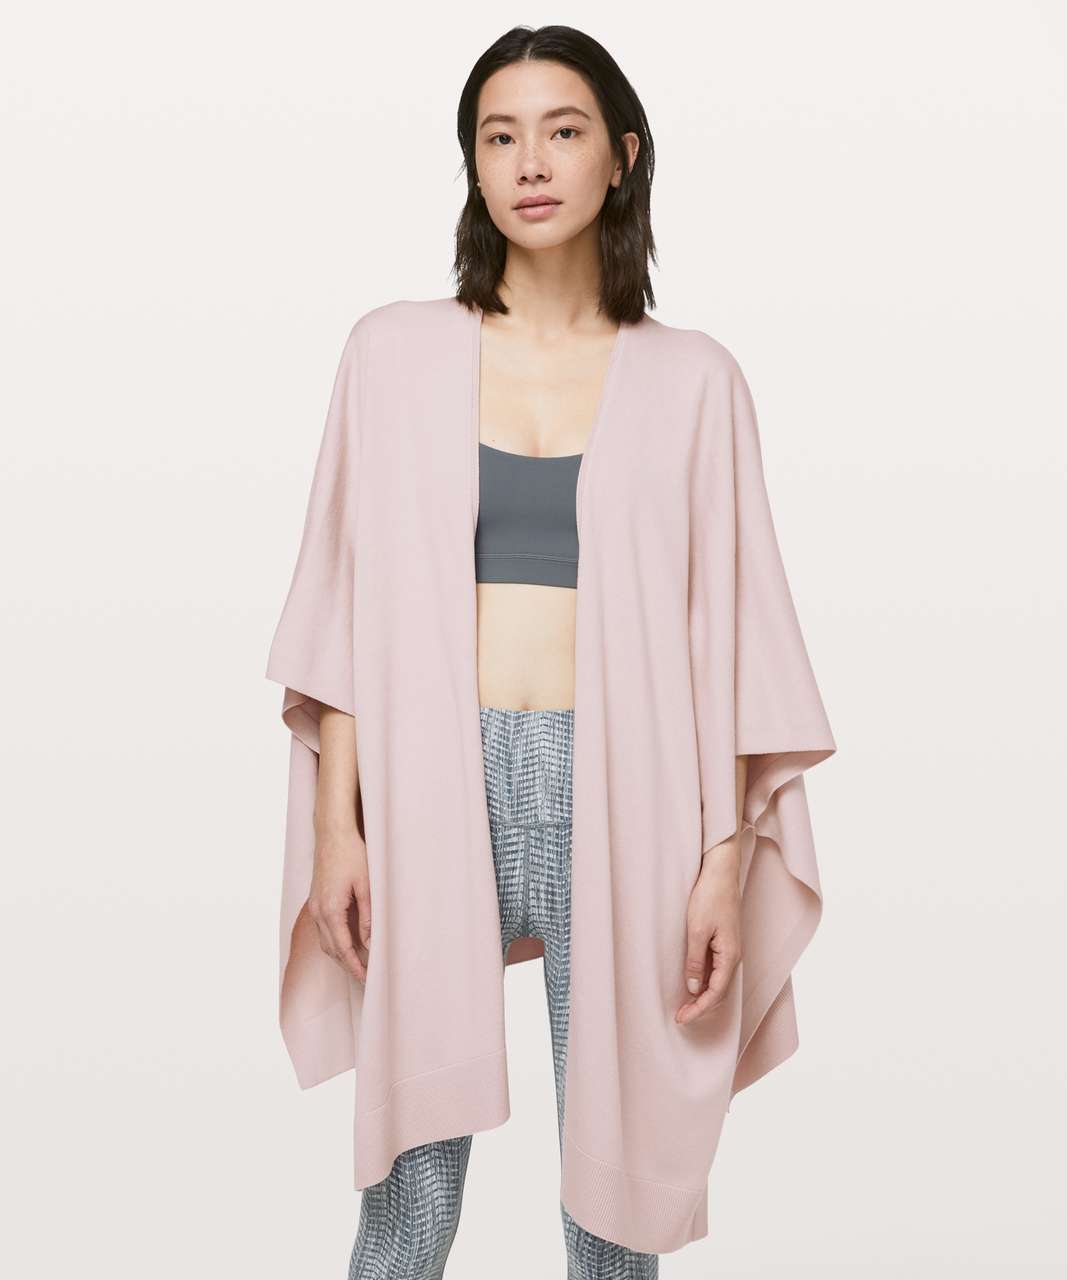 Lululemon Graceful Embrace Wrap In Heathered Pink Bliss